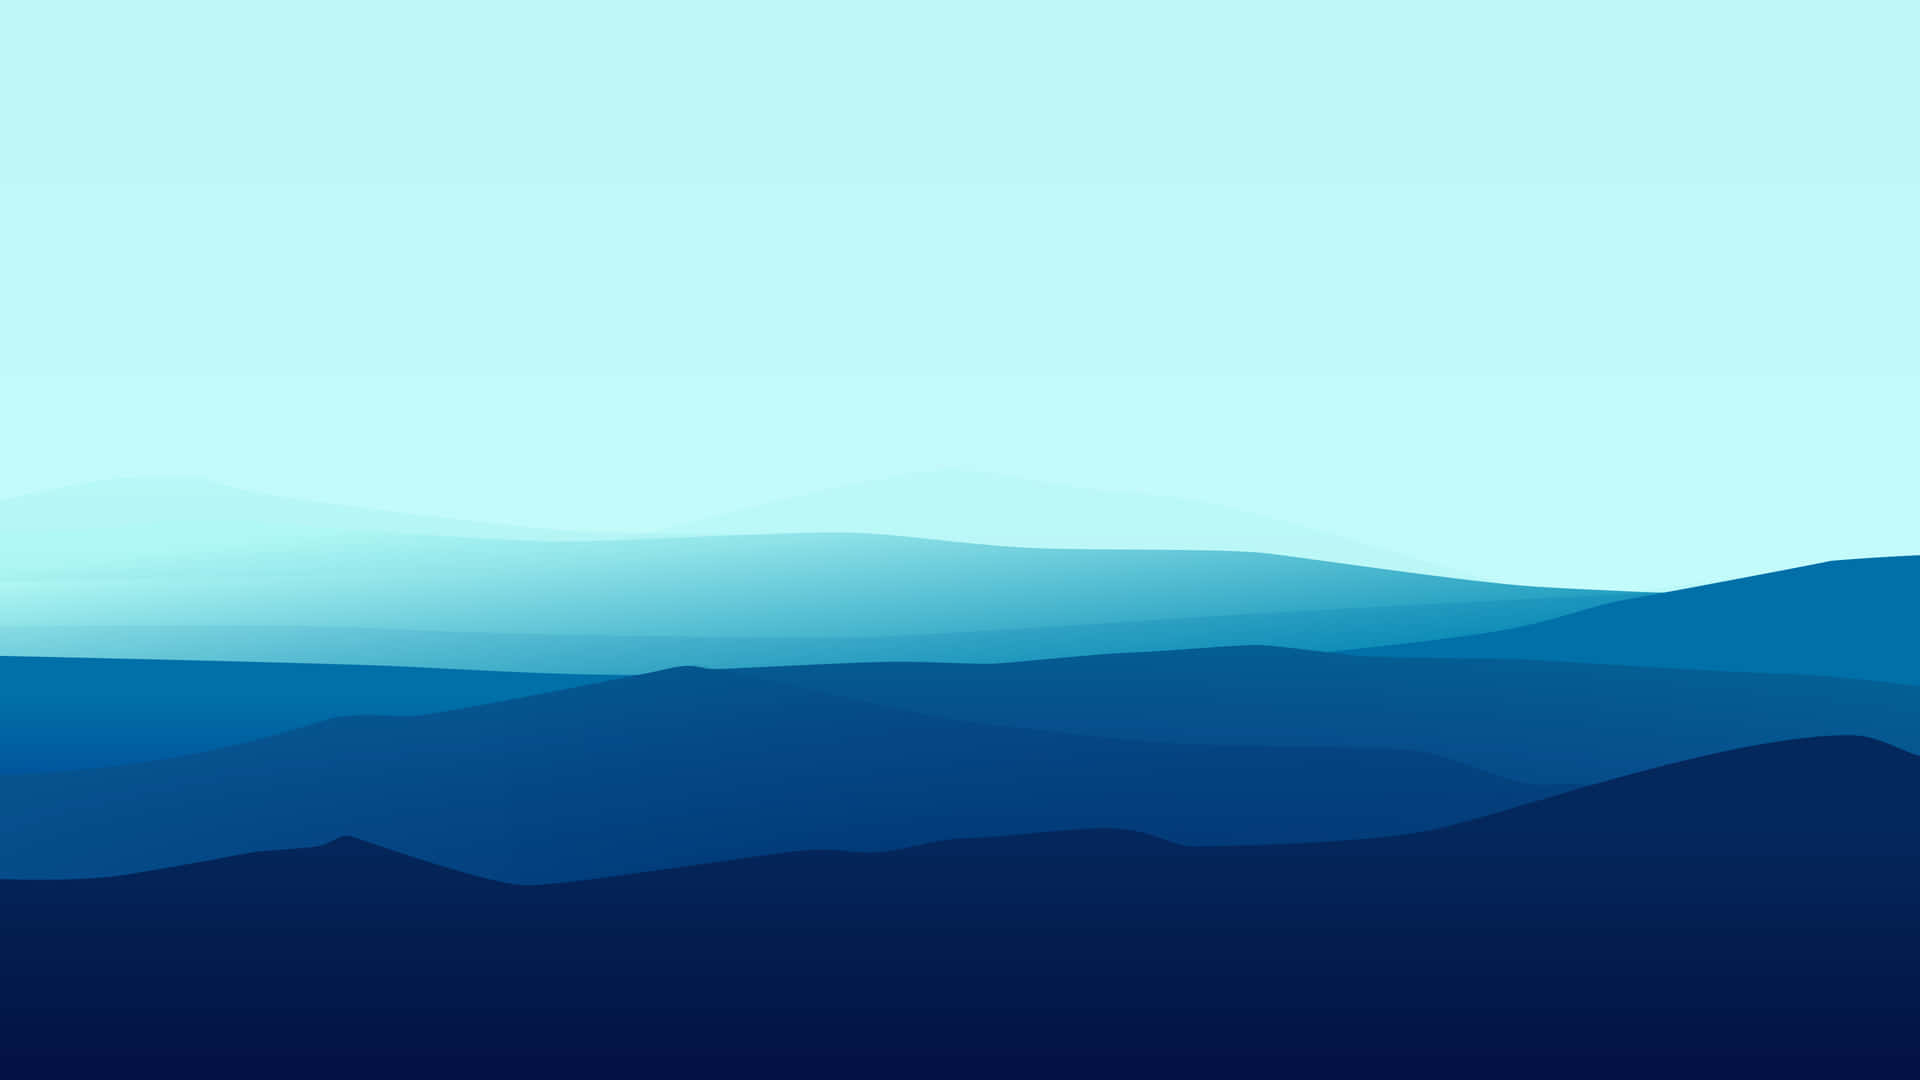 A picture of a minimalist mountain with calming blue hues Wallpaper